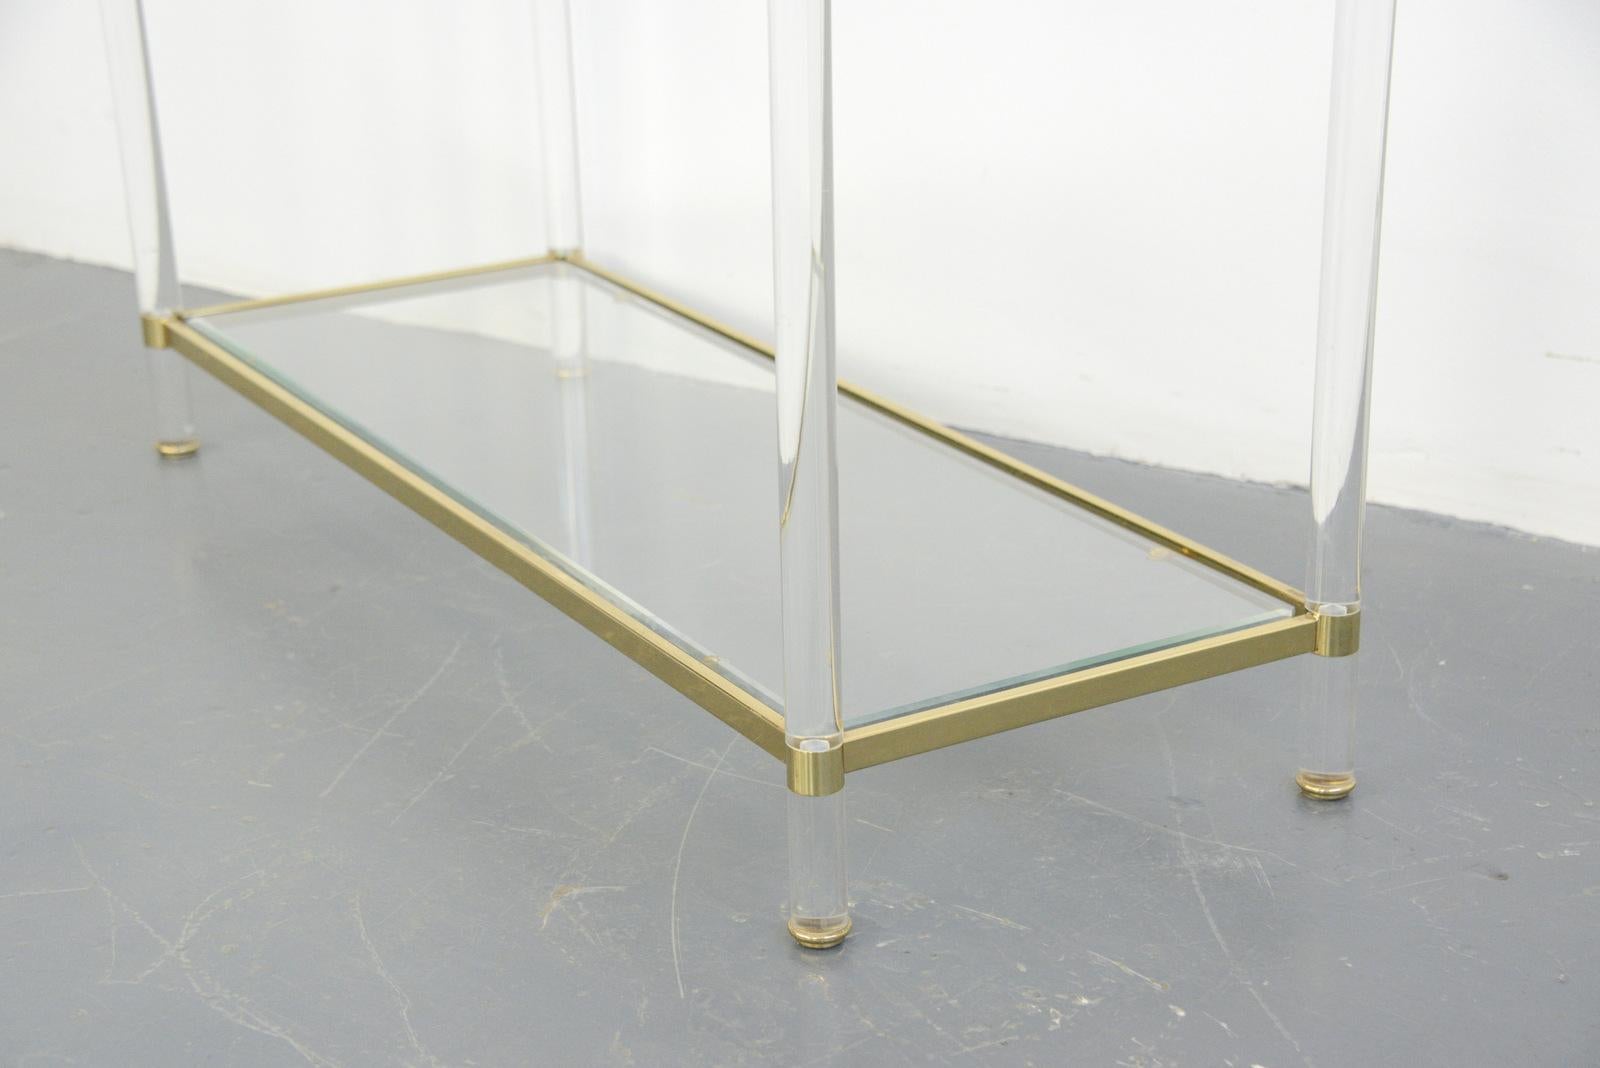 Midcentury brass & Lucite console table

- Lucite legs
- Brass frame
- 2 toughened bevel glass shelves
- French, 1970s
- Measures: 100 cm long x 37 cm deep x 74 cm tall

Condition report:

Some light patina to the brass in places no major